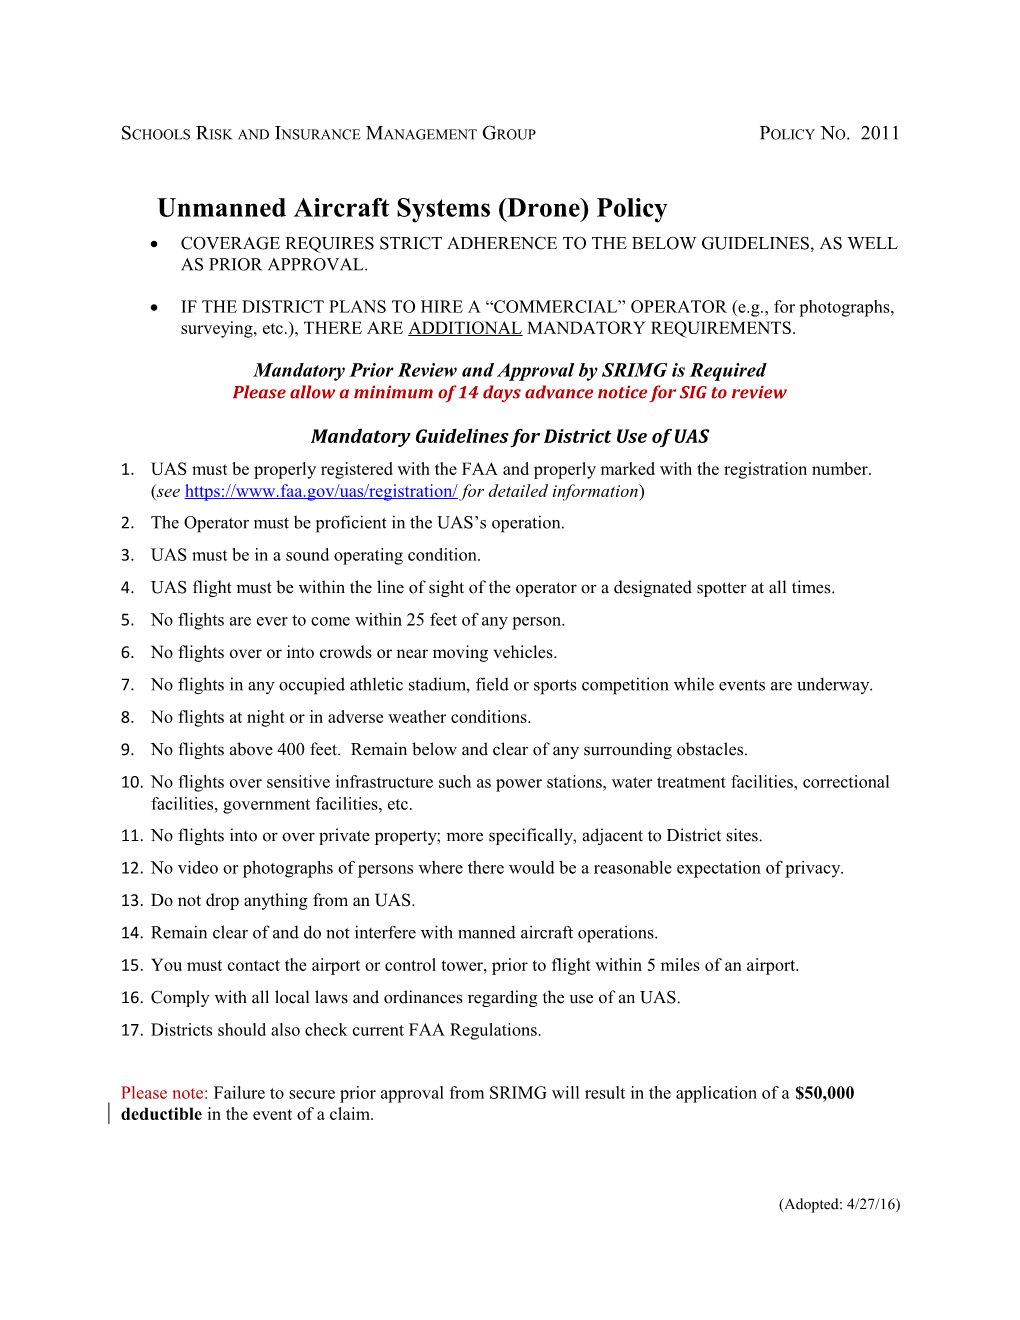 Schools Risk and Insurance Management Group Policy No. 2011